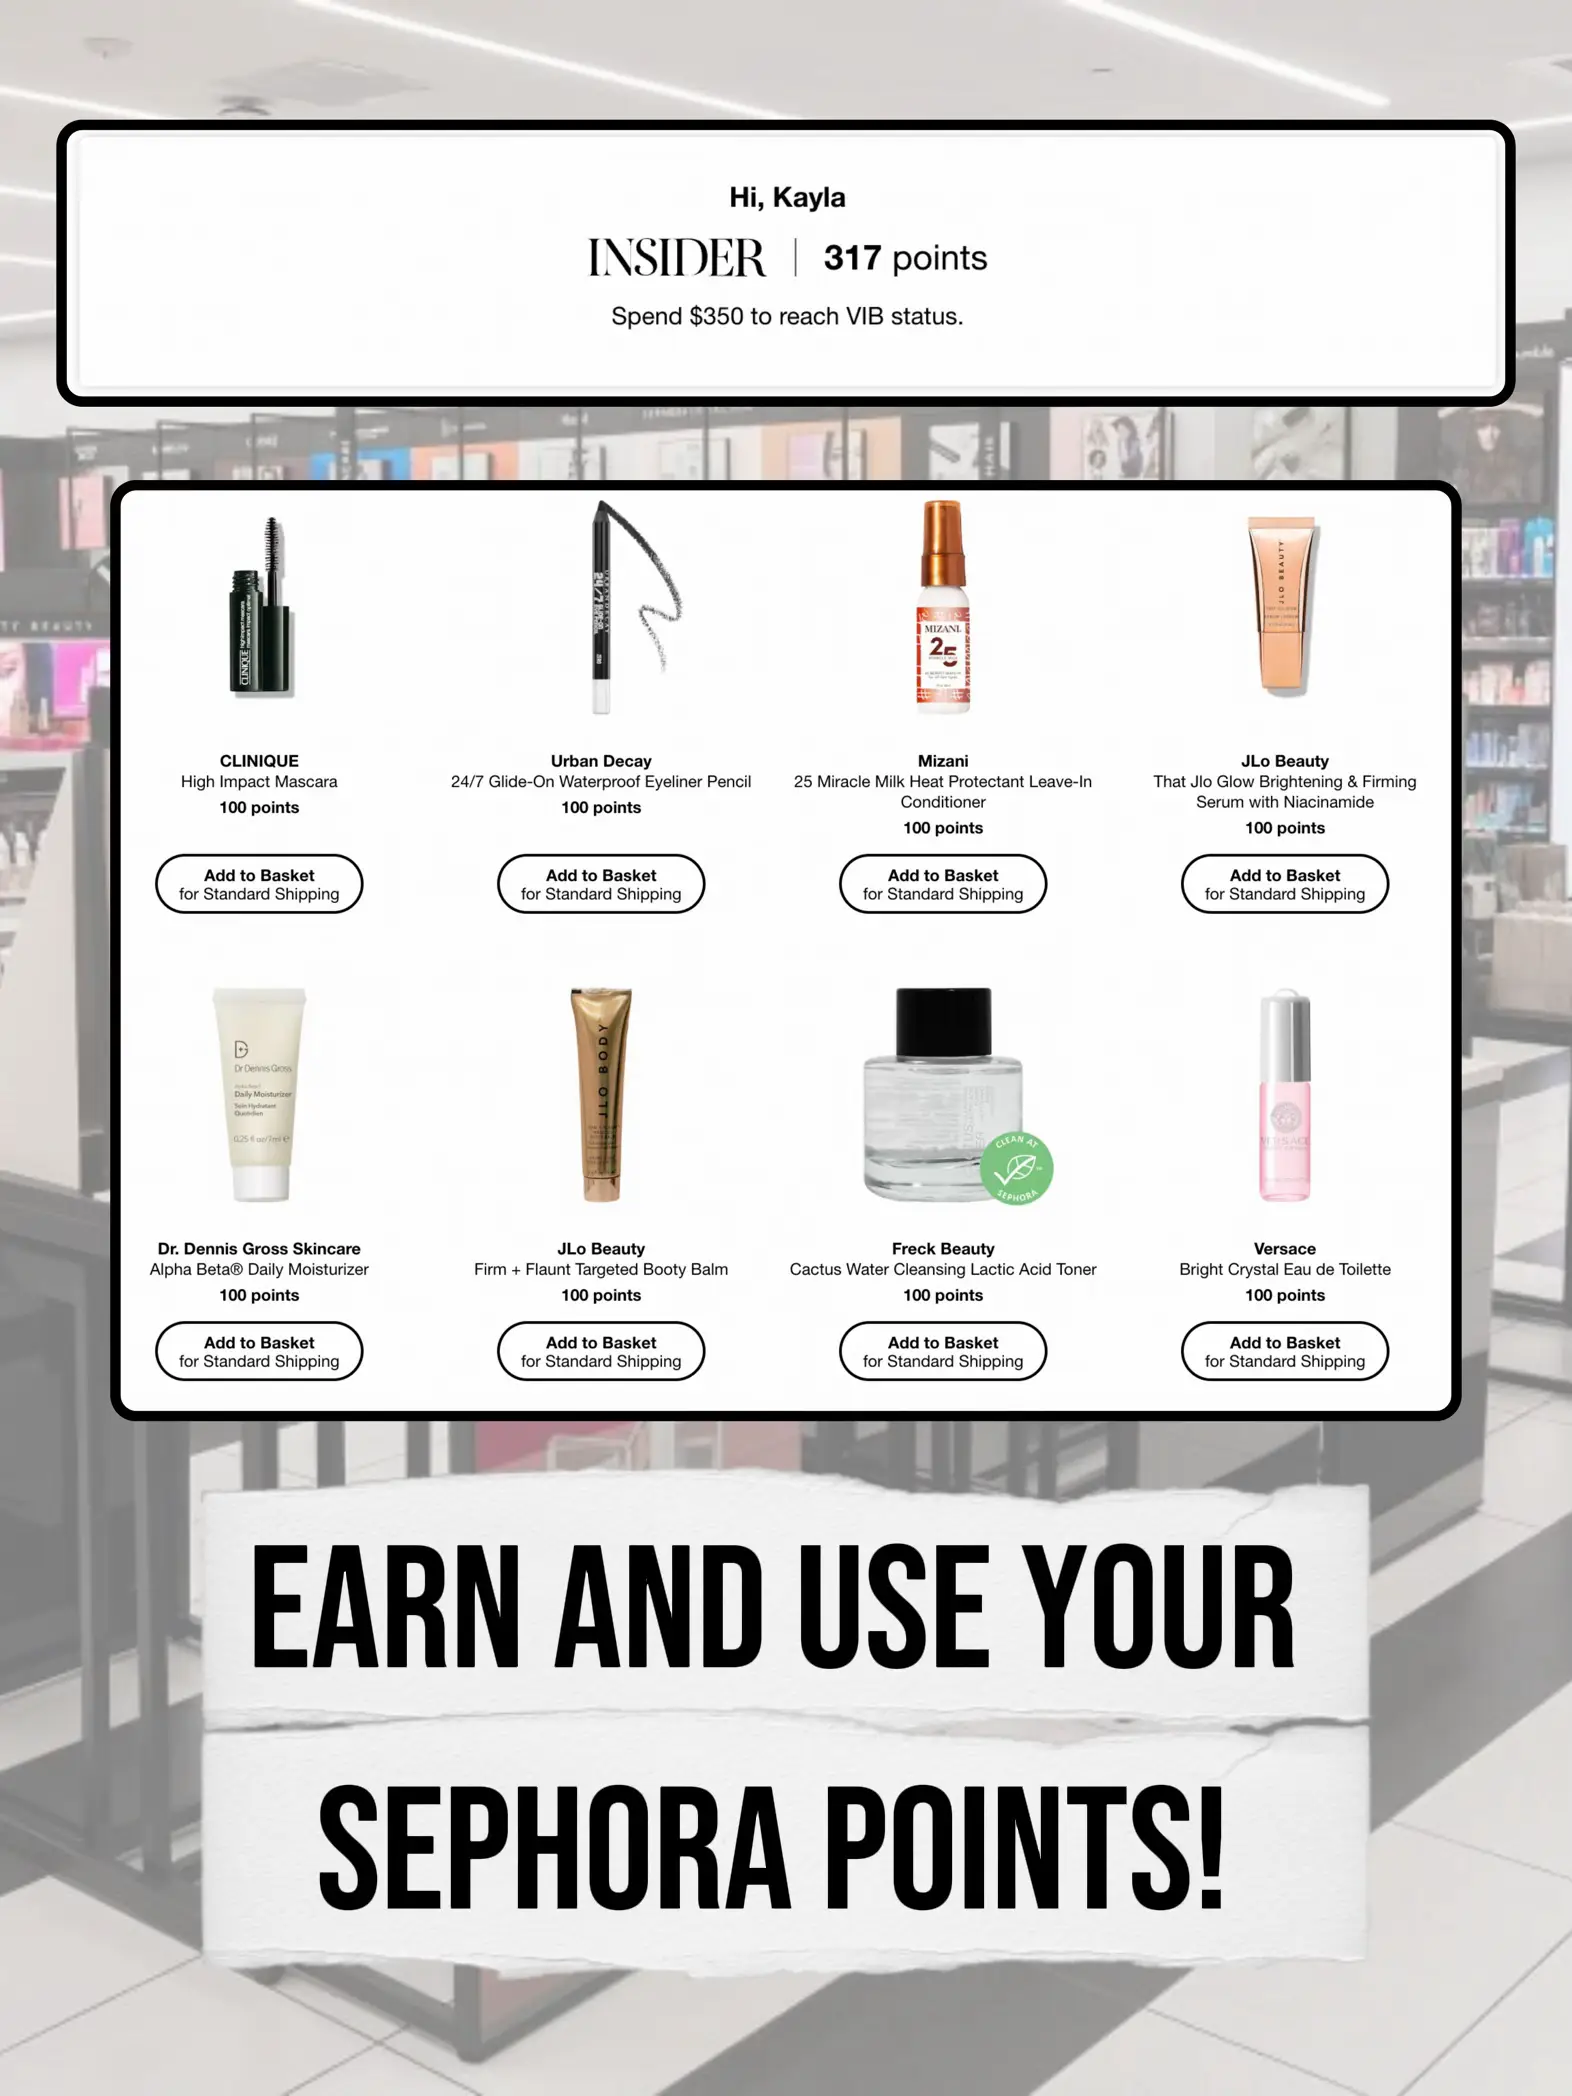 Do you love all things beauty? Join @Sephora at @Kohls + get a 15%  associate discount on all our beauty products (top brands included!).